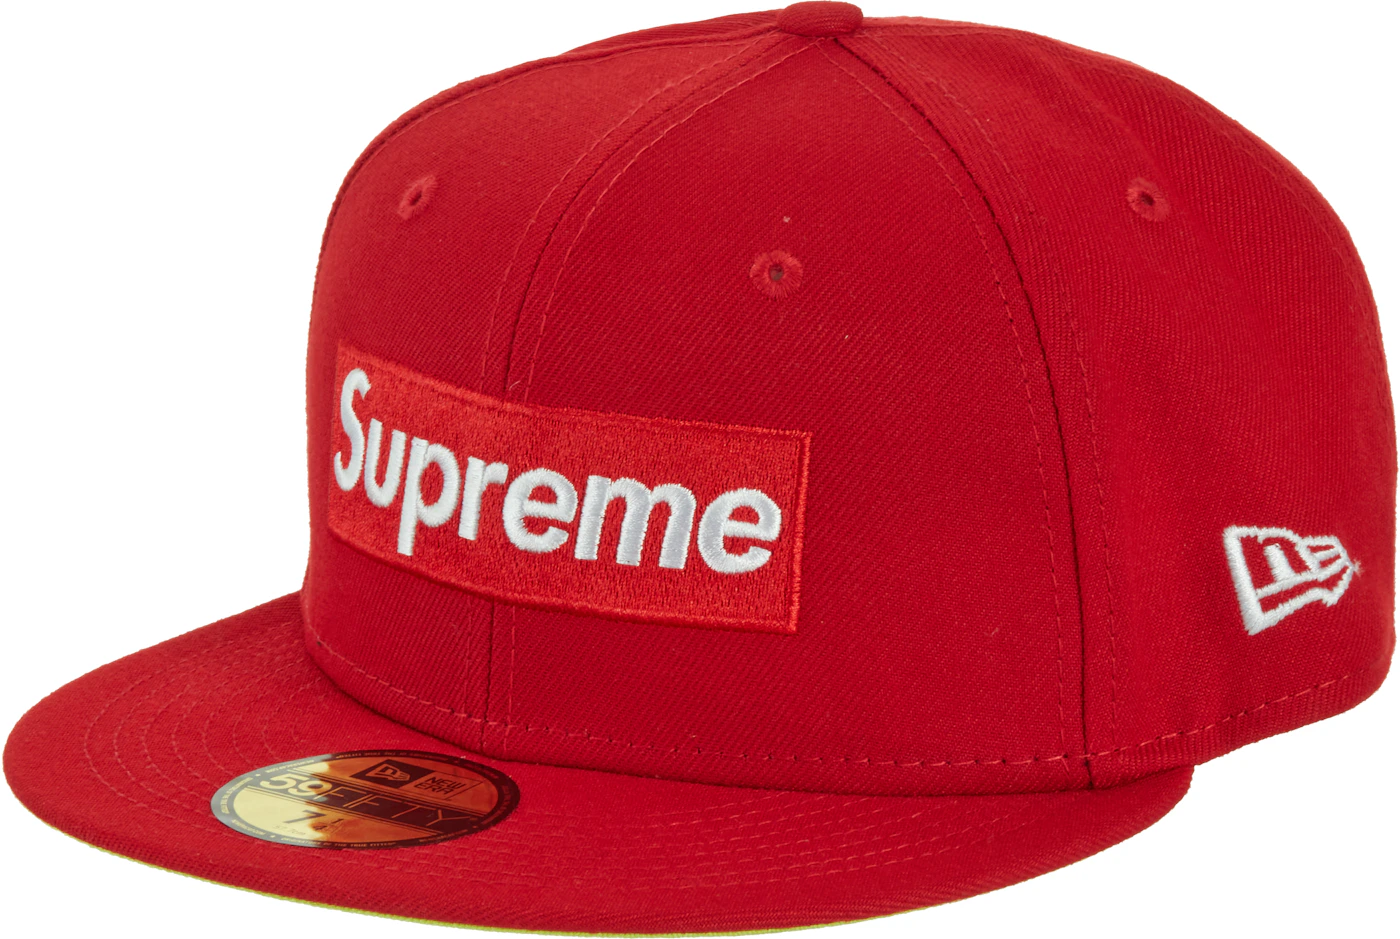 Supreme - Authenticated Box Logo Hat - Cotton Red Plain for Men, Very Good Condition